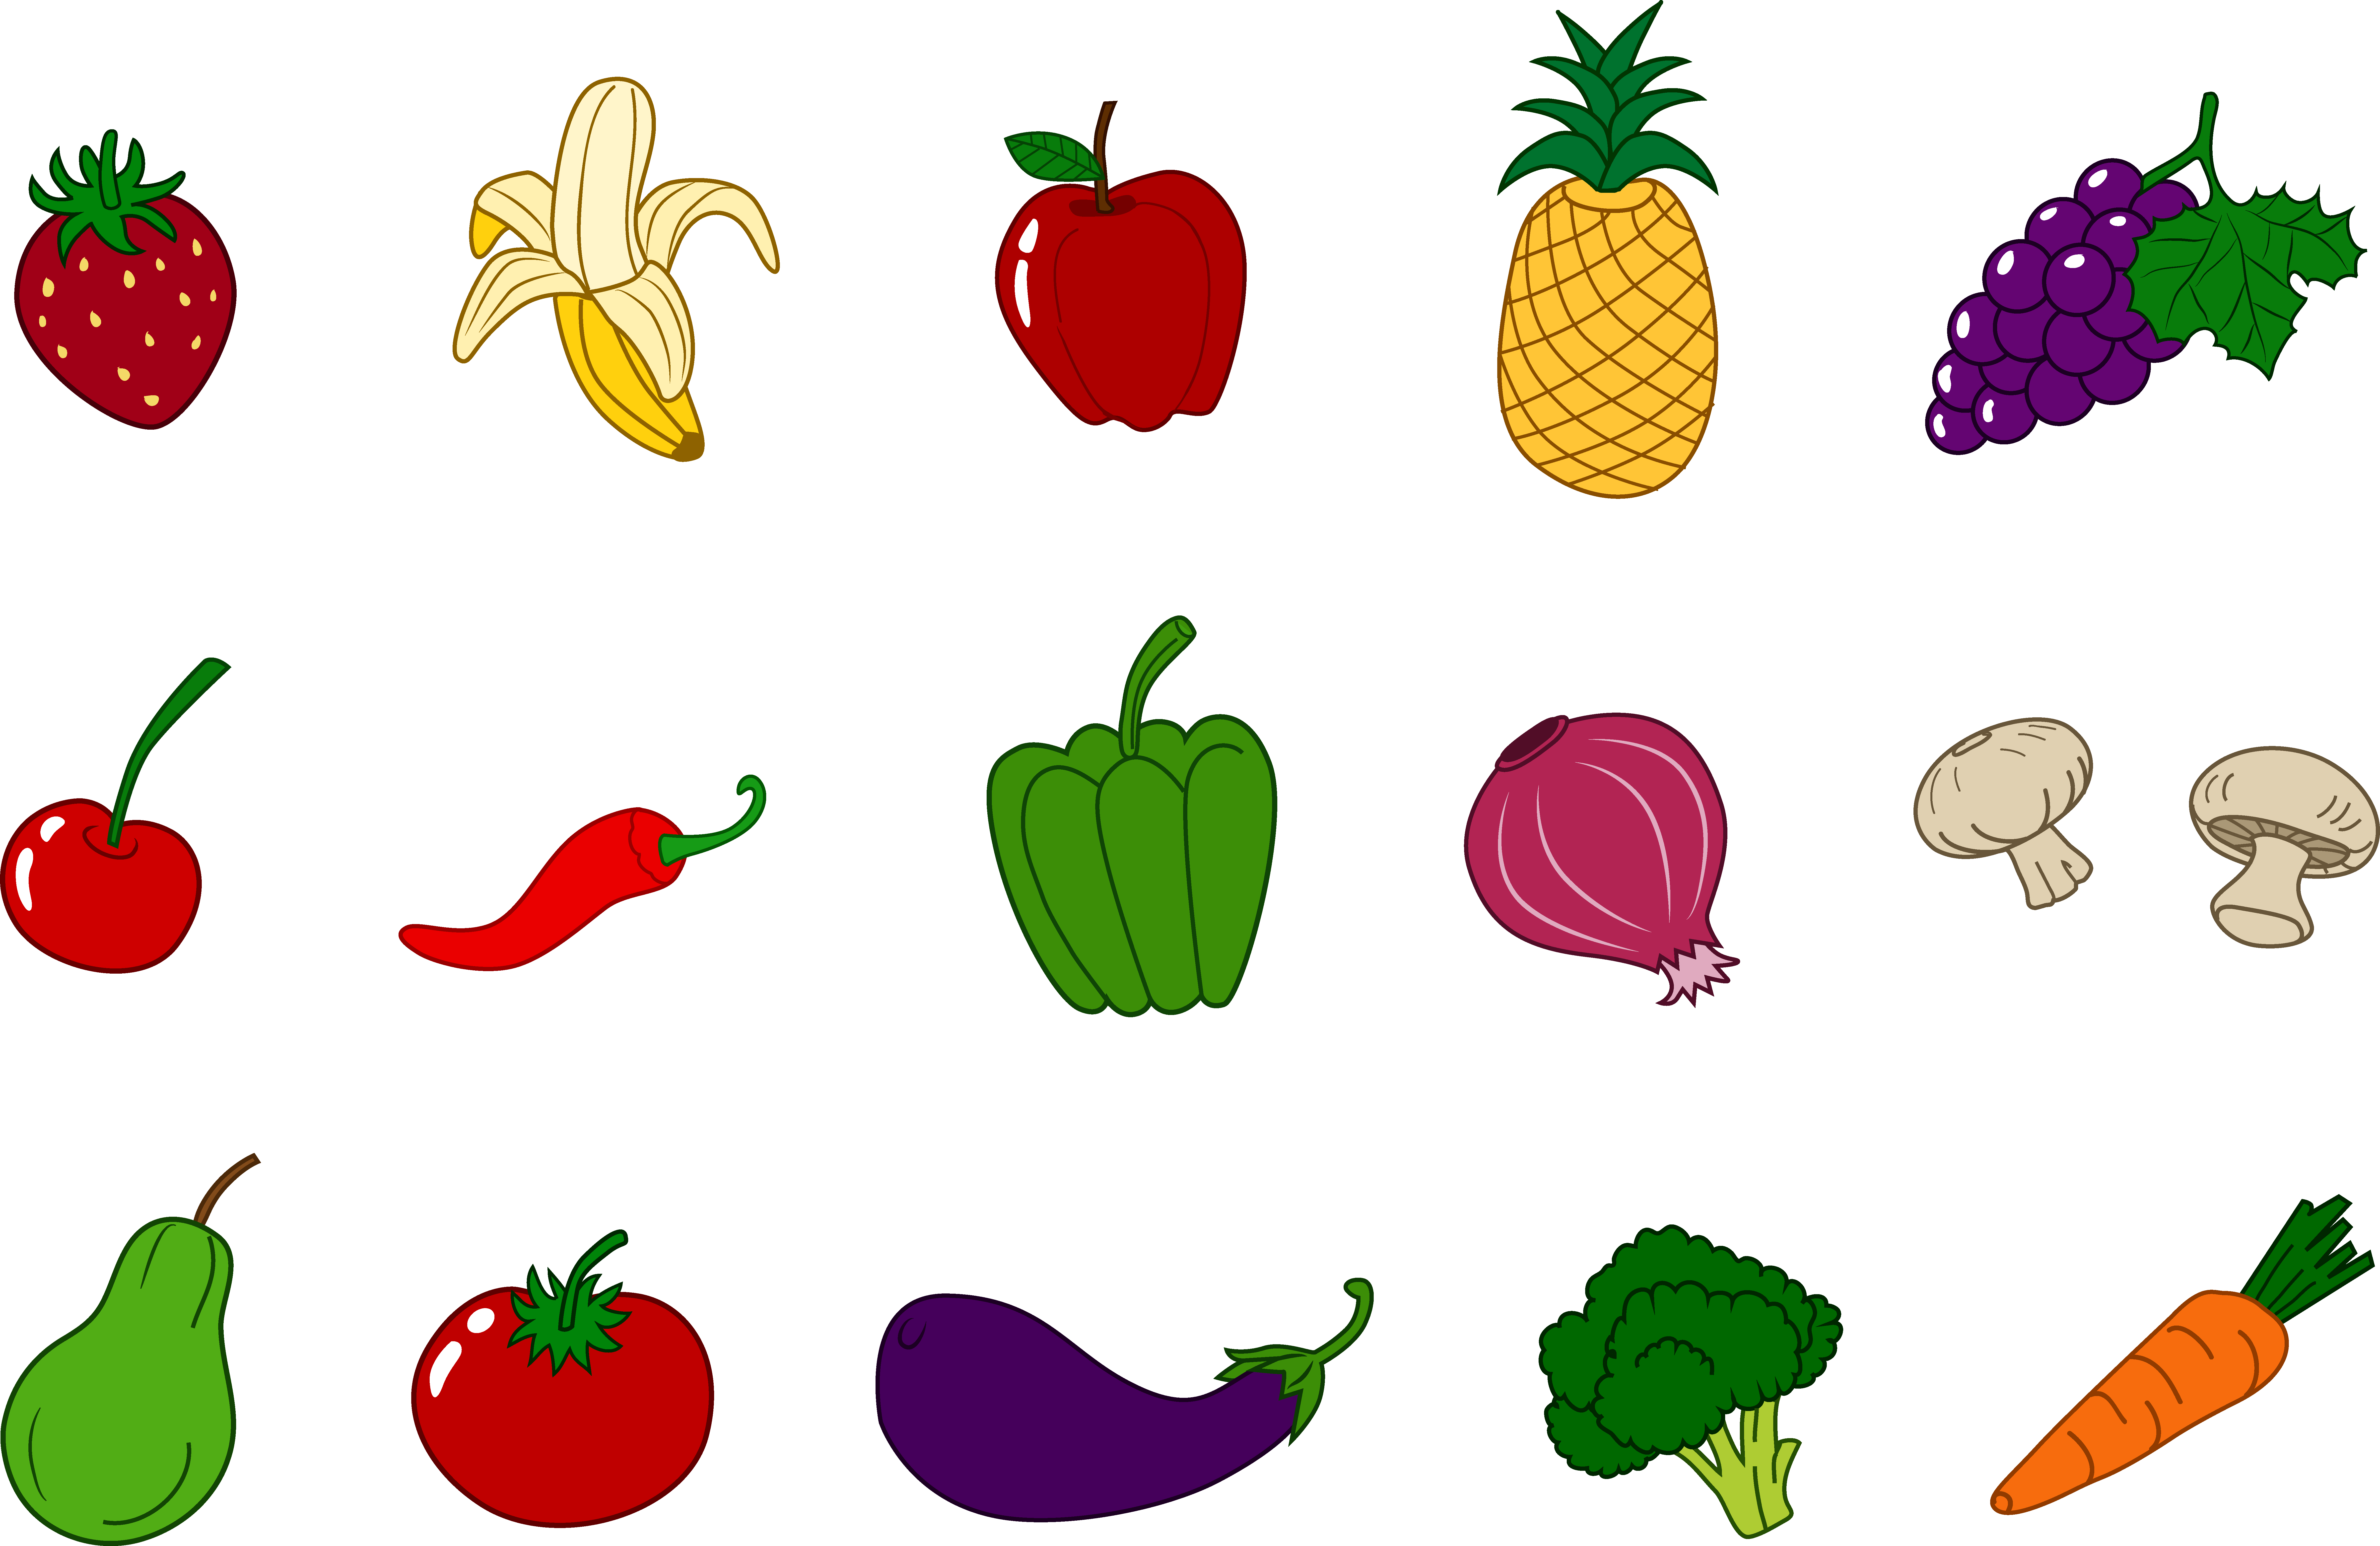 Fruits and vegetables background clipart 